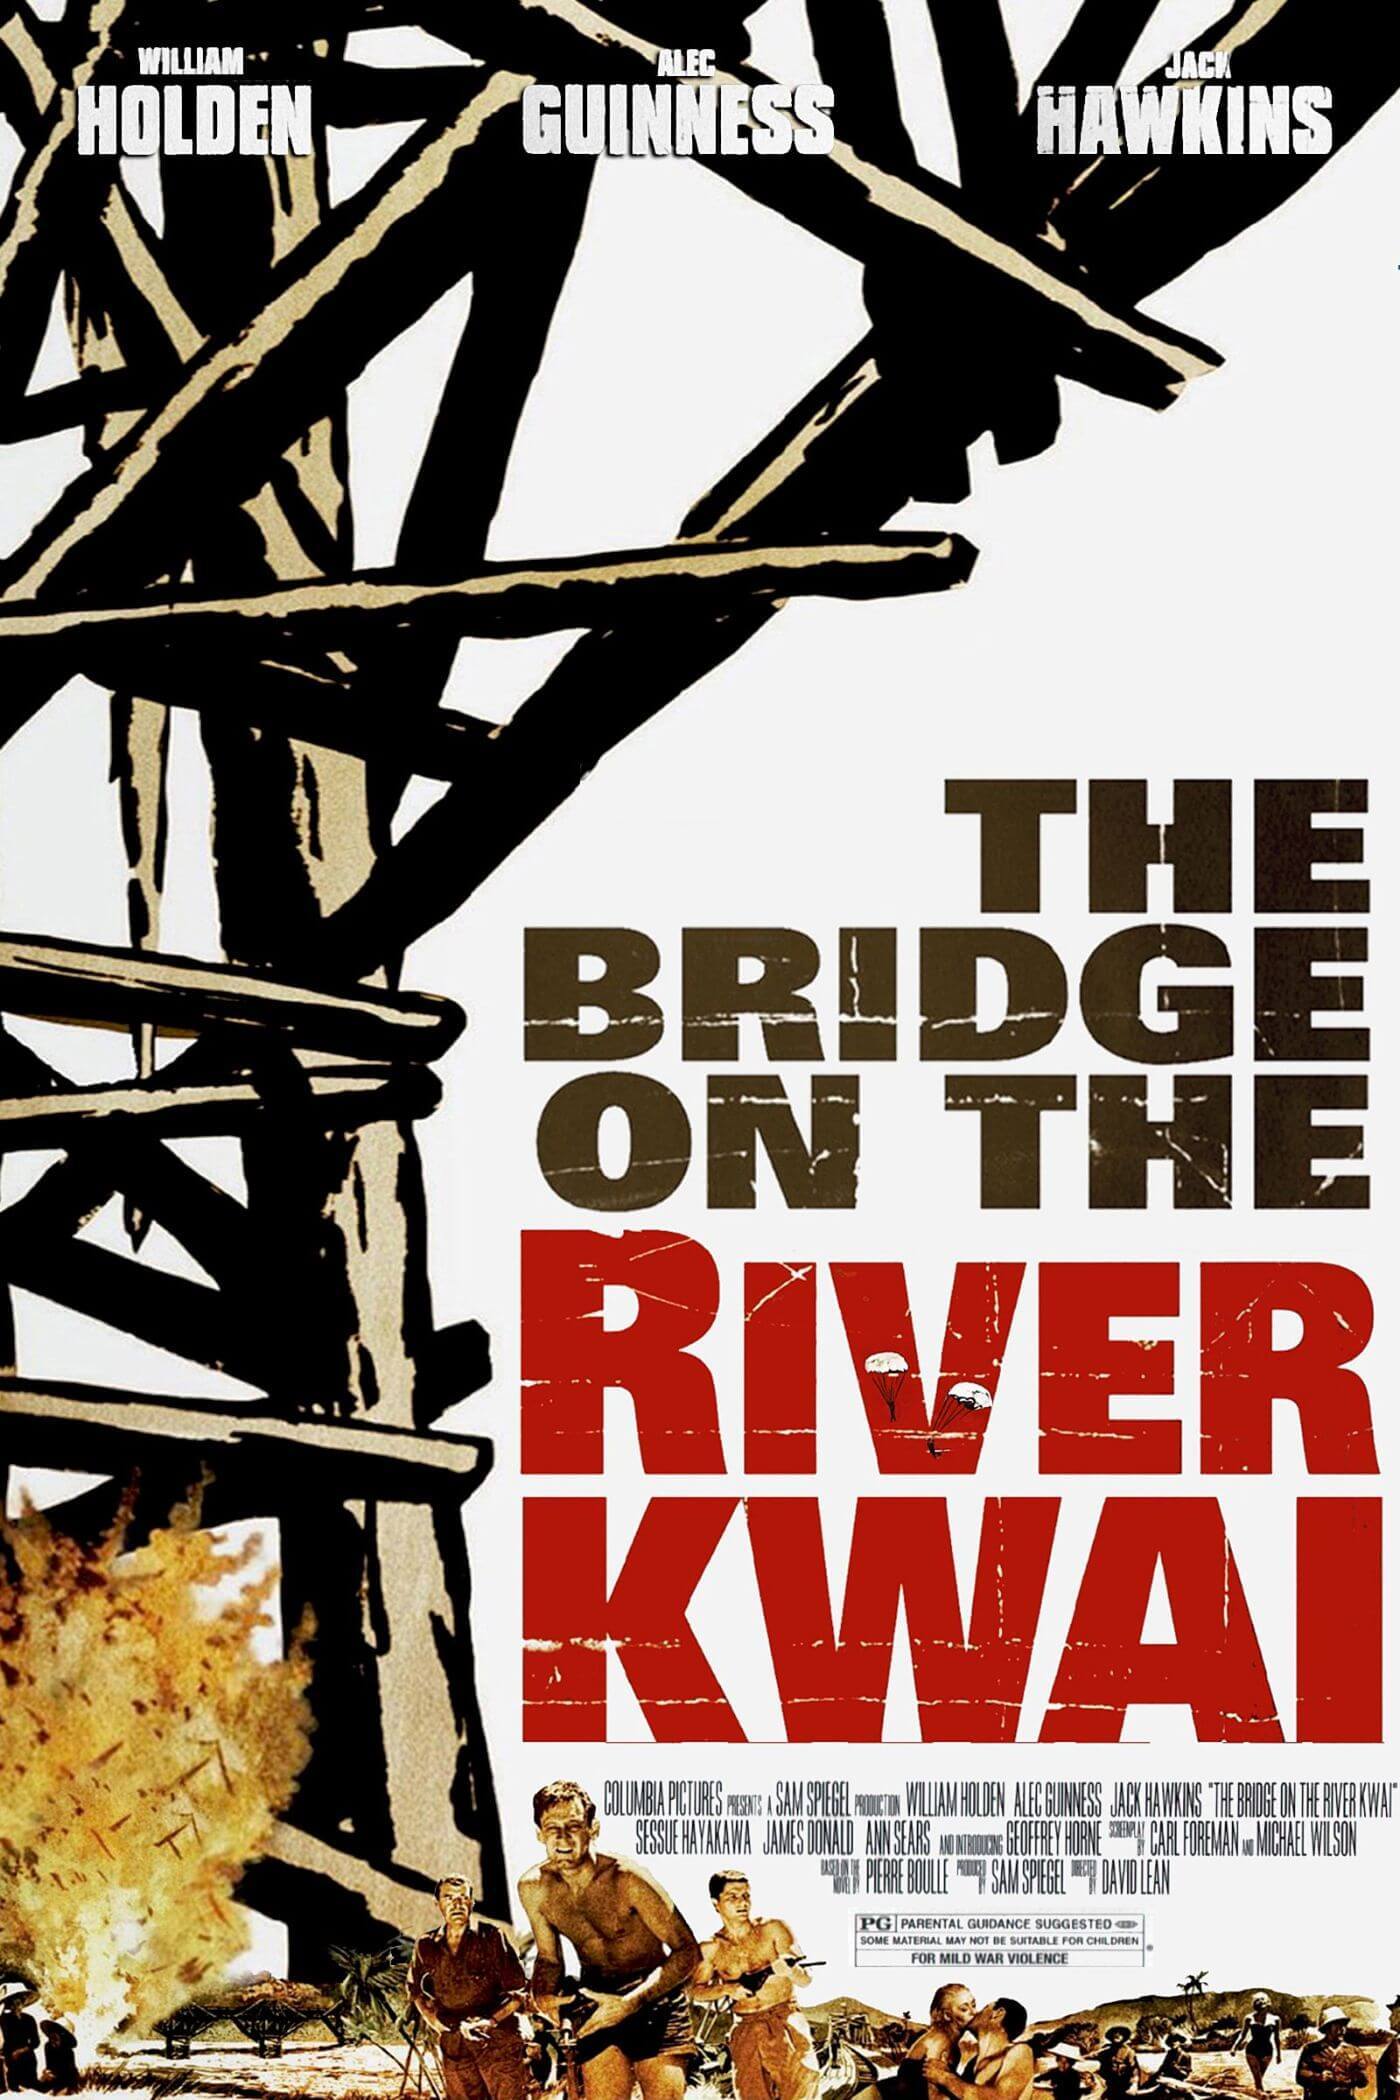 Bridge On The River Kwai - Alec Guiness - Hollywood War Classics Movie Poster - Framed Prints by Kaiden Thompson | Buy Posters, Frames, Canvas &amp; Digital Art Prints | Small, Compact, Medium and Large Variants